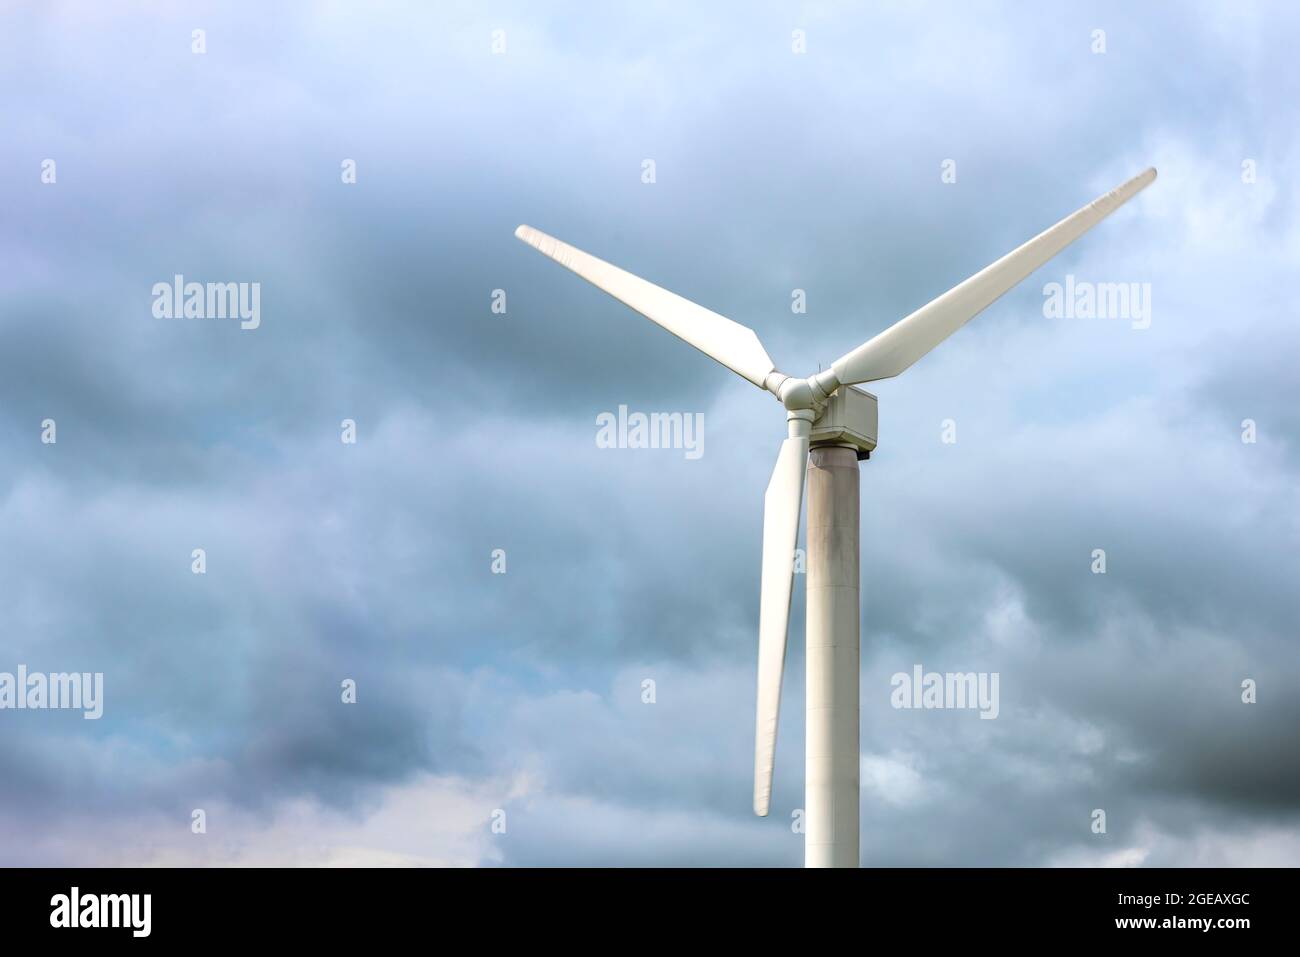 Windmills for electricity generation. Wind turbine against the background of a dark gloomy sky, windy weather, place to insert text. Stock Photo